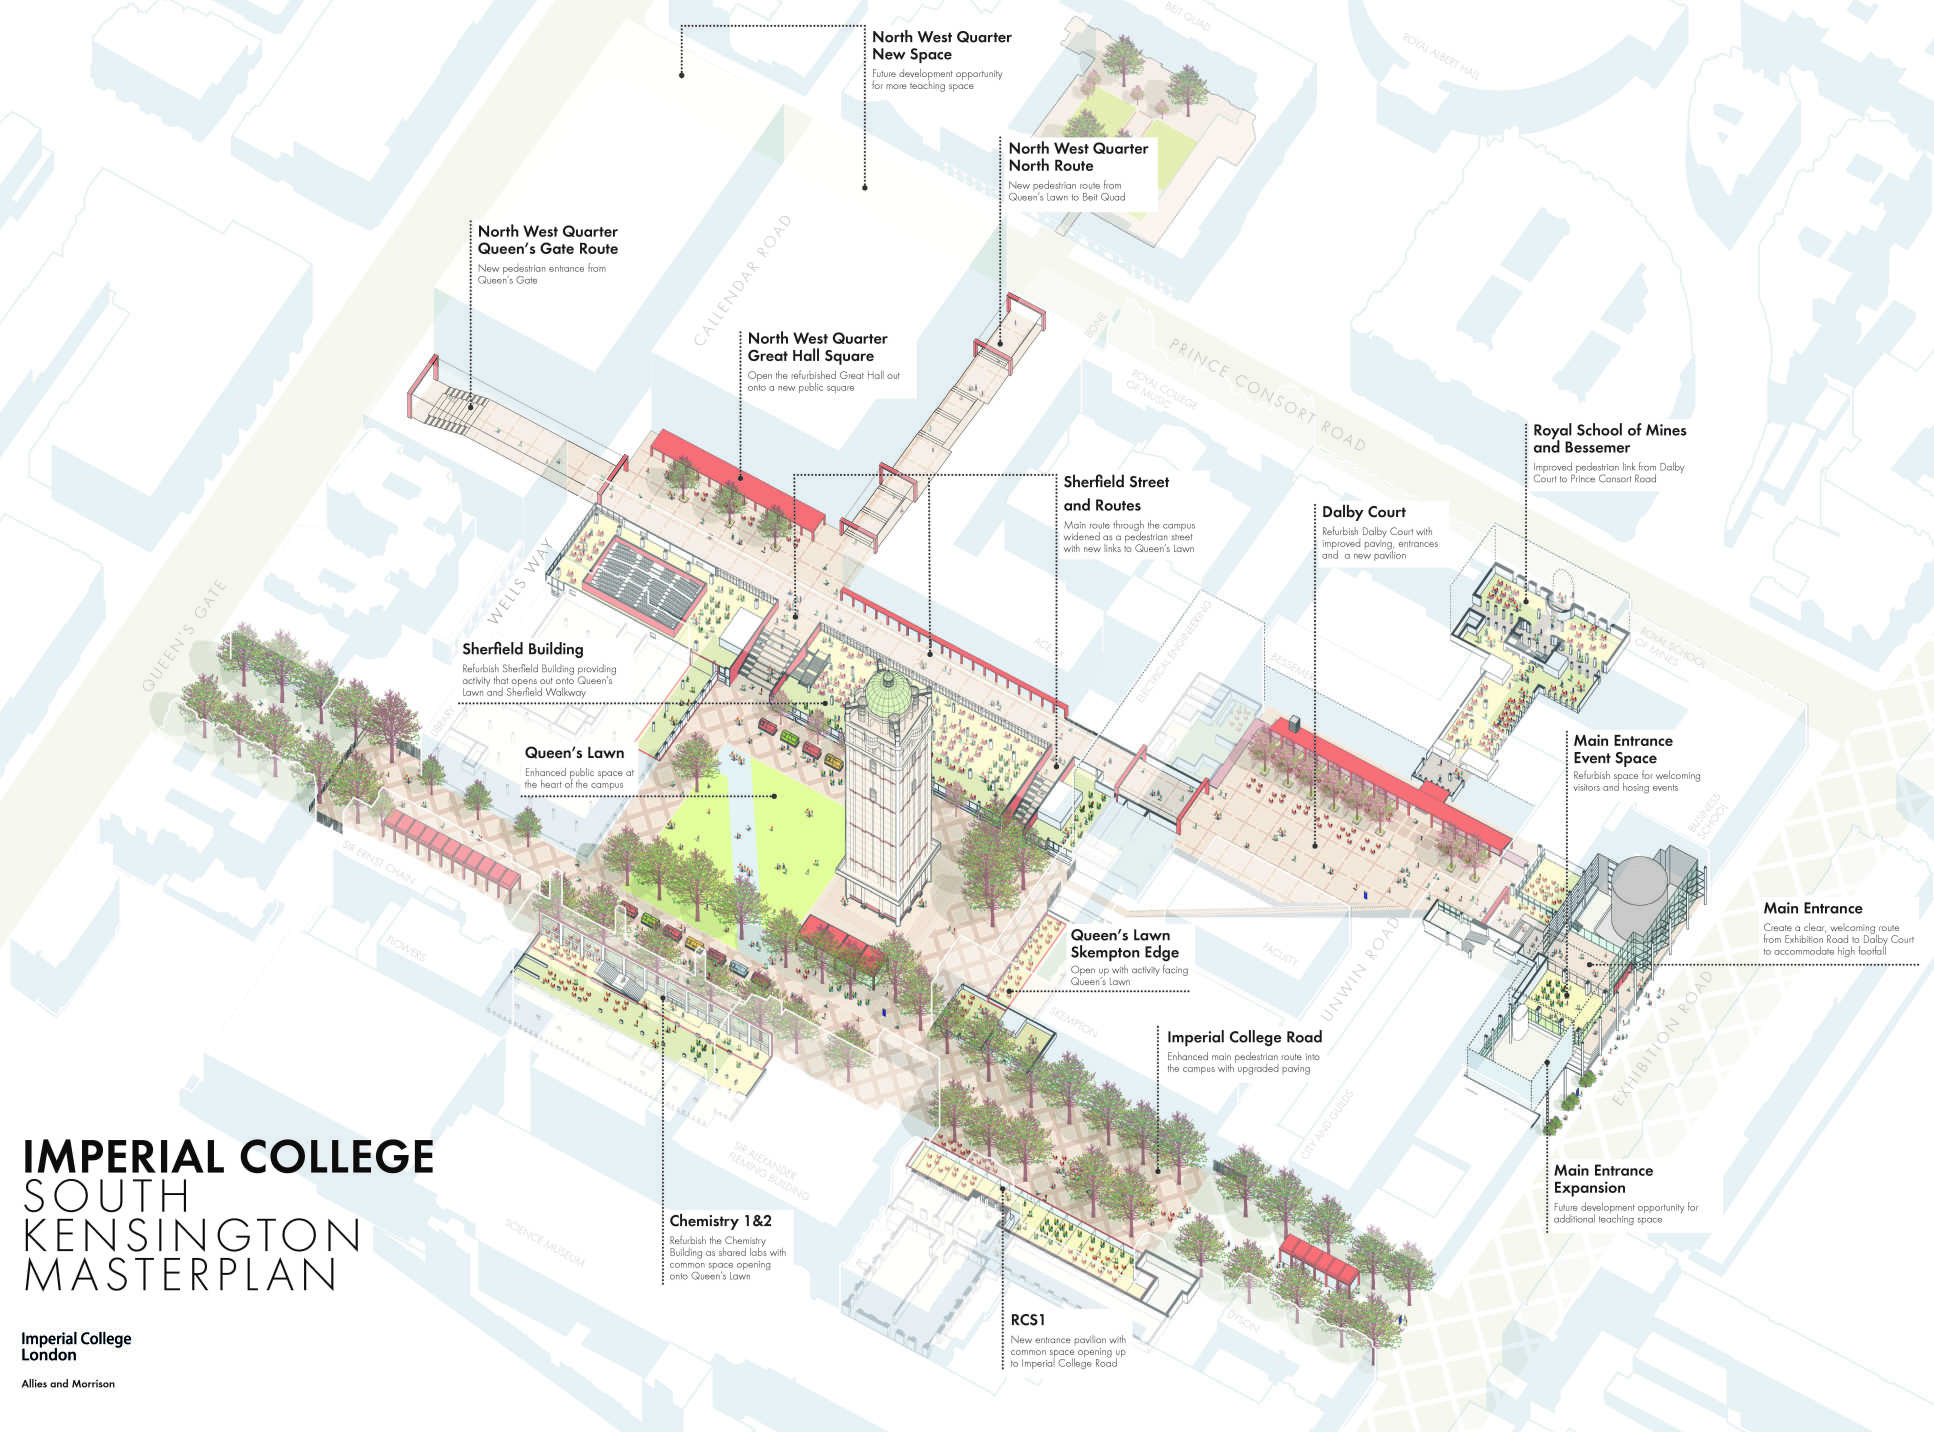 South Kensington Masterplan About Imperial College London